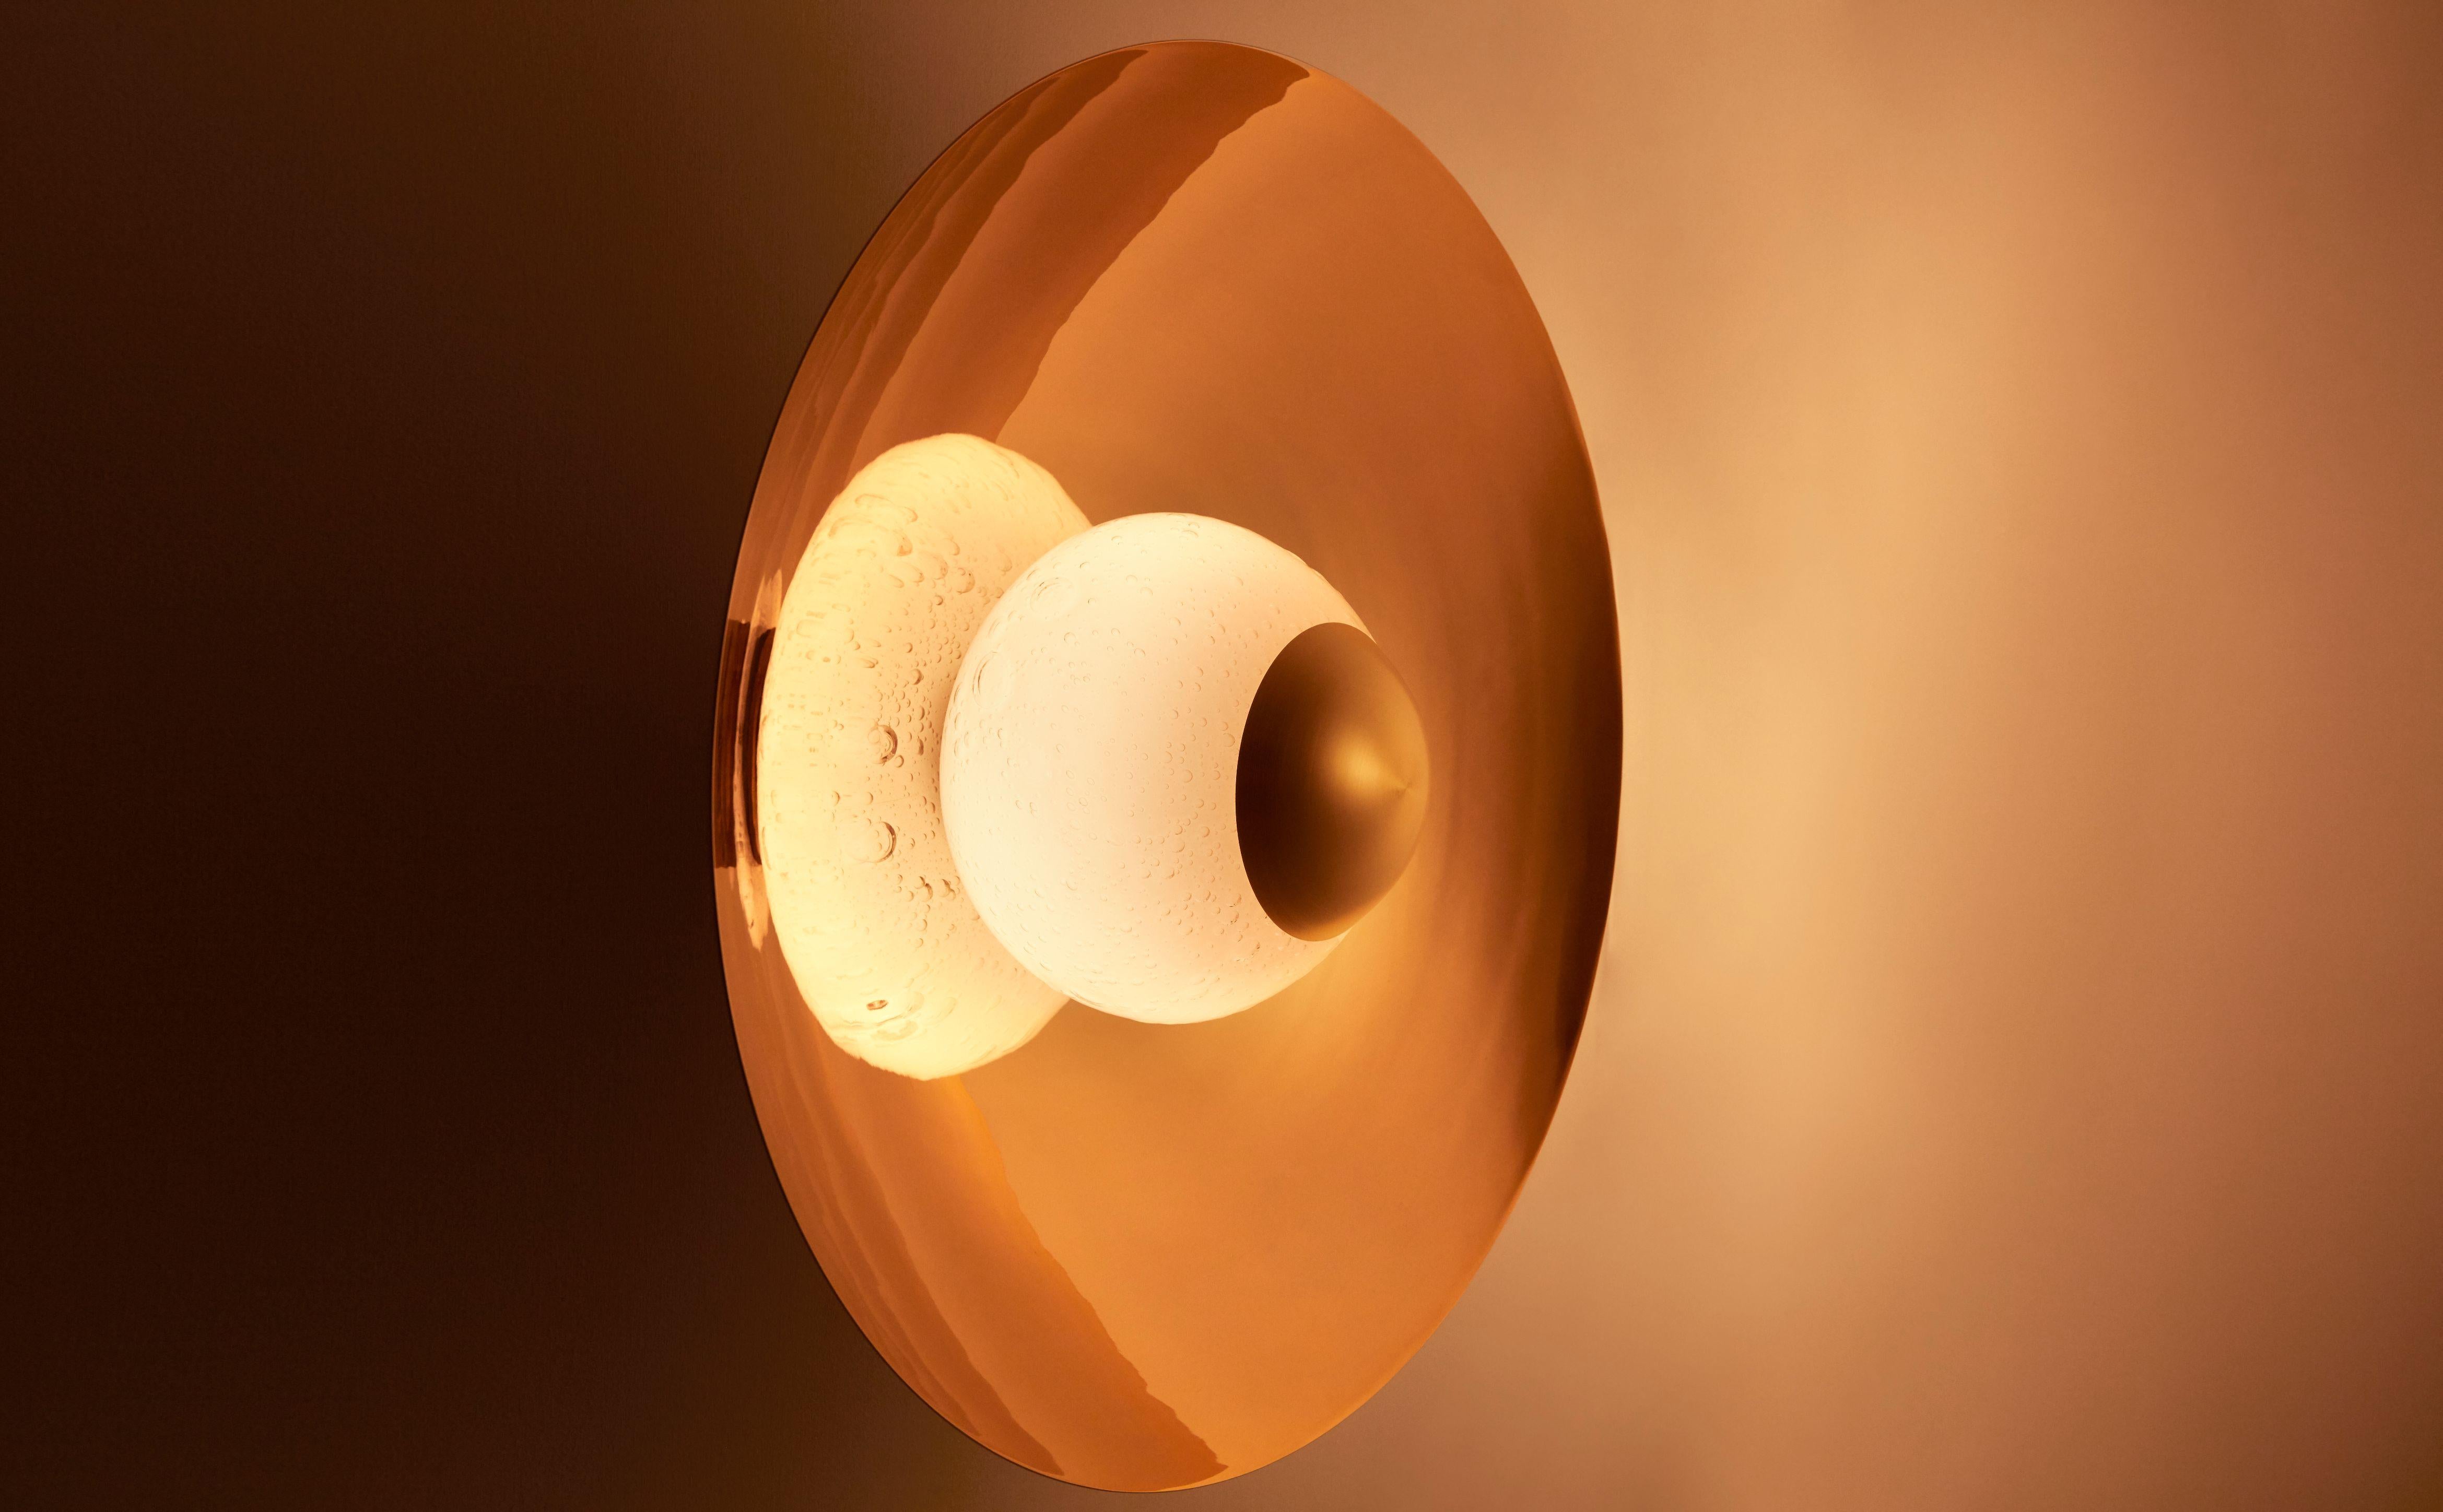 Céleste wall lamp by Mydriaz
Dimensions: diameter 60 x depth 34 cm
Materials: Bras and glass
Finishes: Golden-plated polished brass, white nickel finish on polished brass, black nickel finish on polished brass
7 kg

Our products are handmade